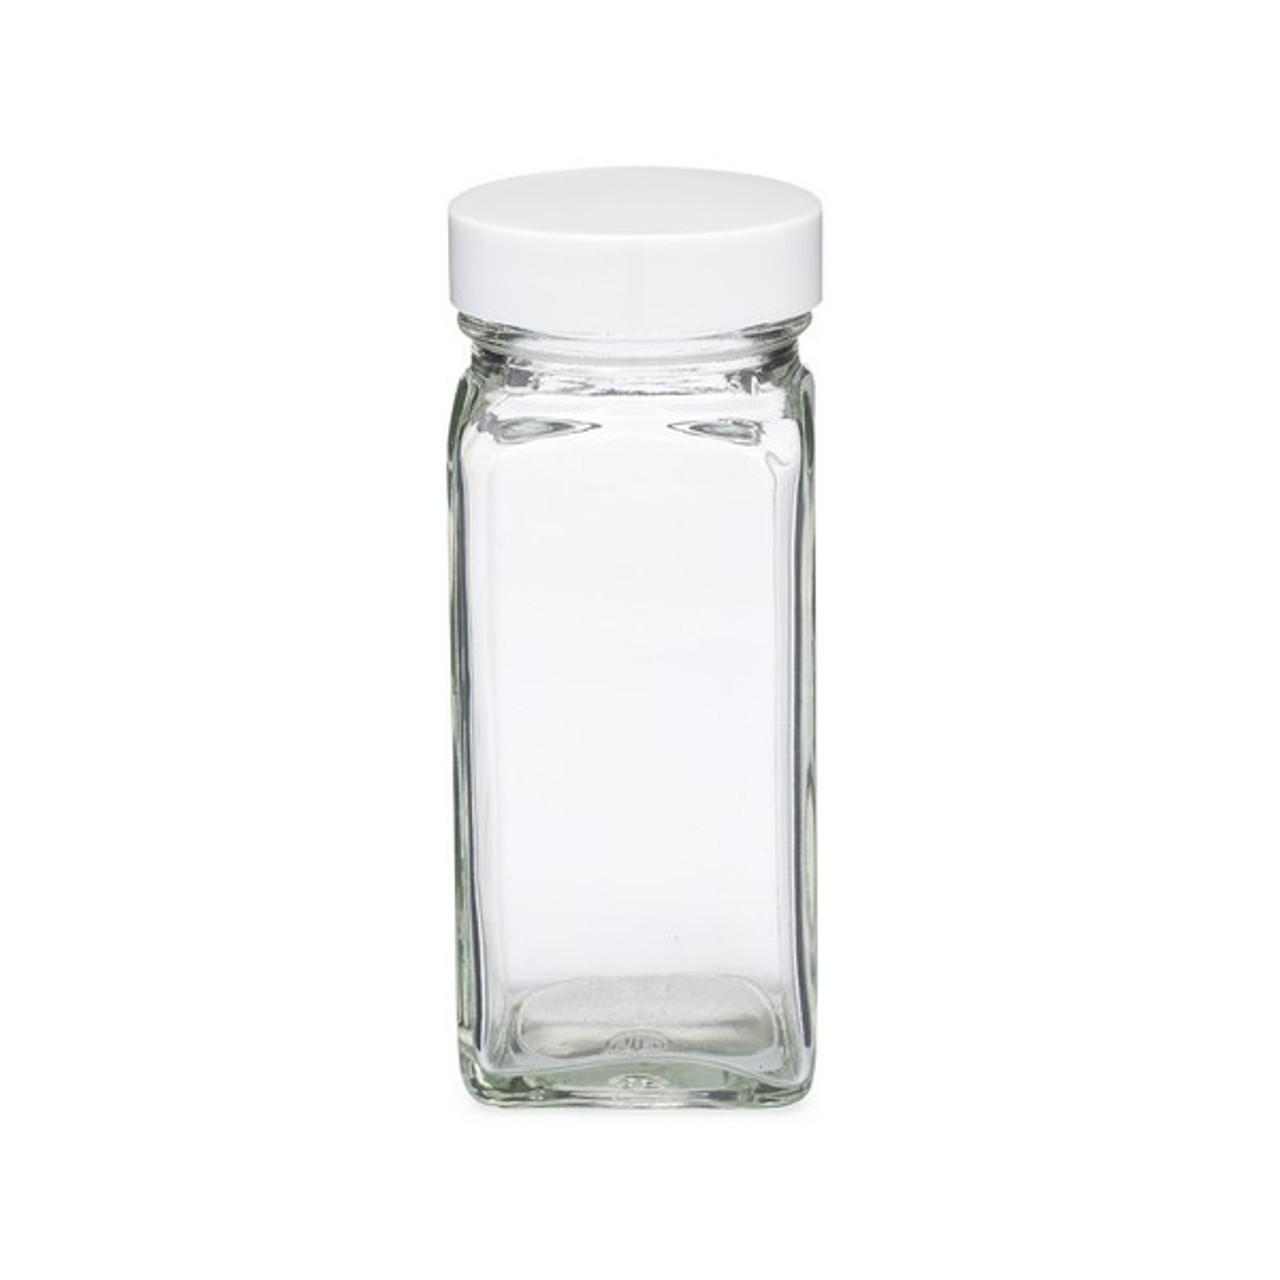 Glass Spice Jars  Square Jars Available In Black & White - The